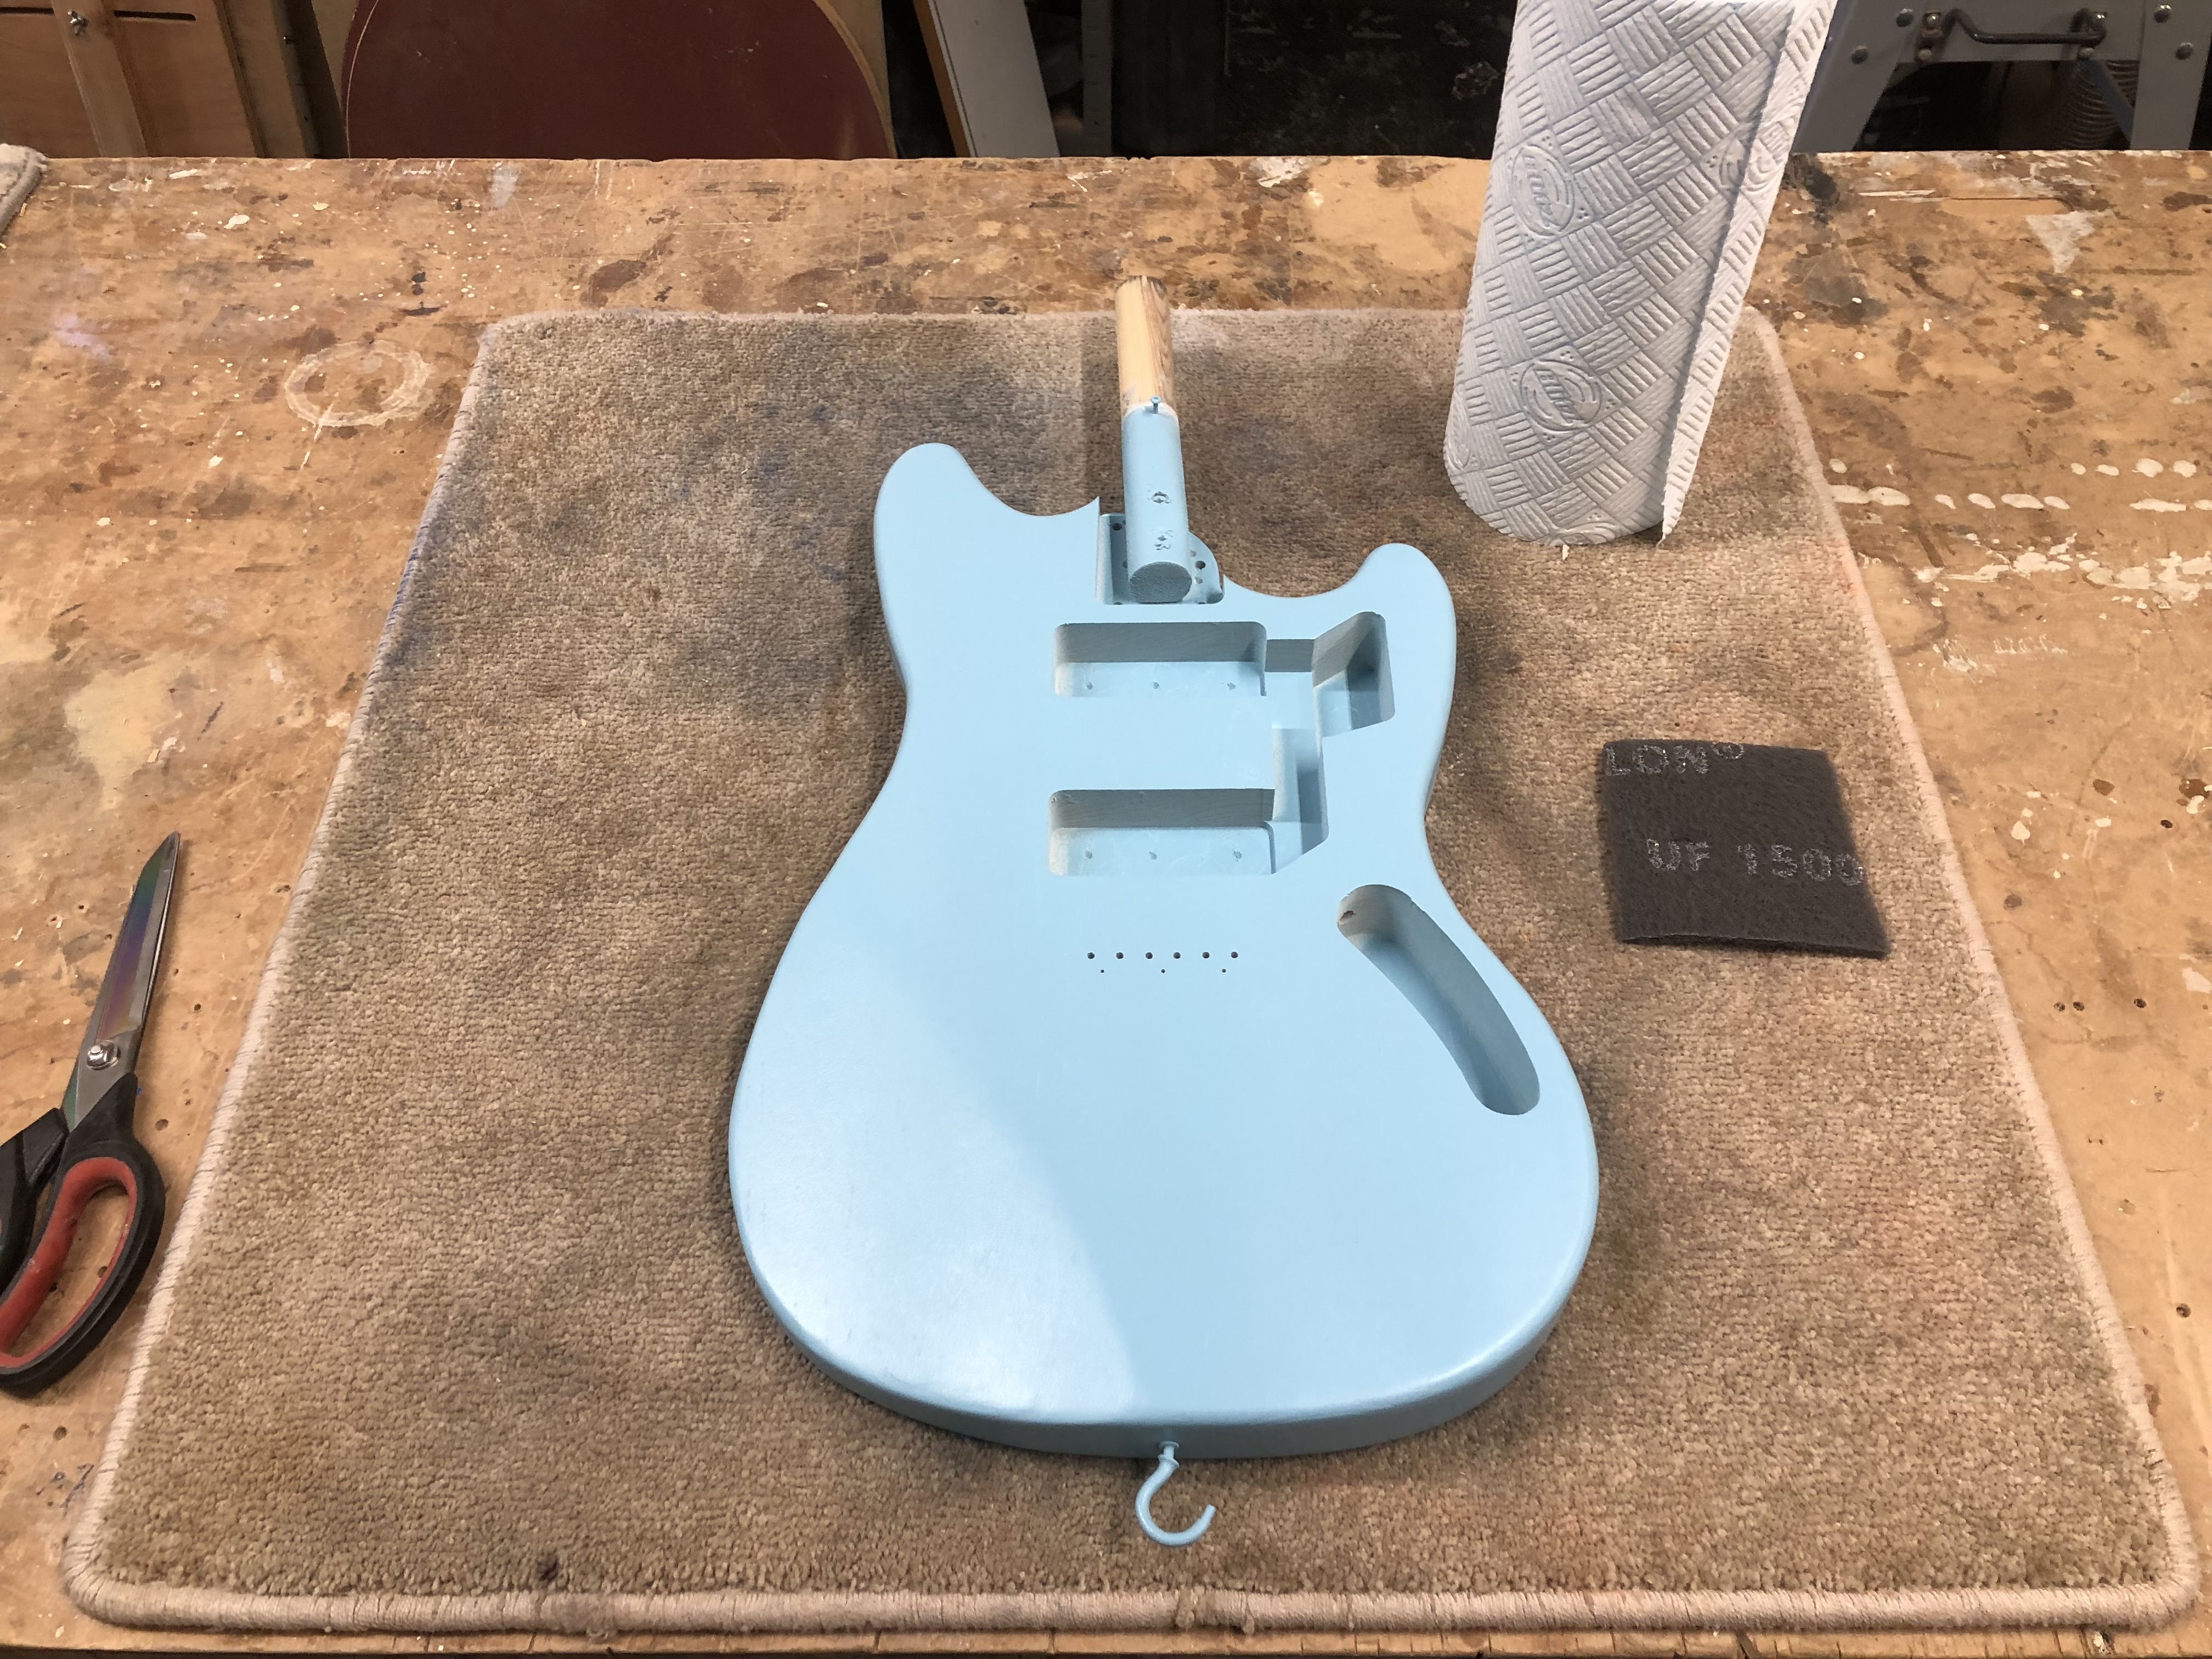 A photo of an offset-style guitar body on the workbench, painted a pale blue colour. Next to it sits a sanding pad, some scissors, and a roll of kitchen-roll.